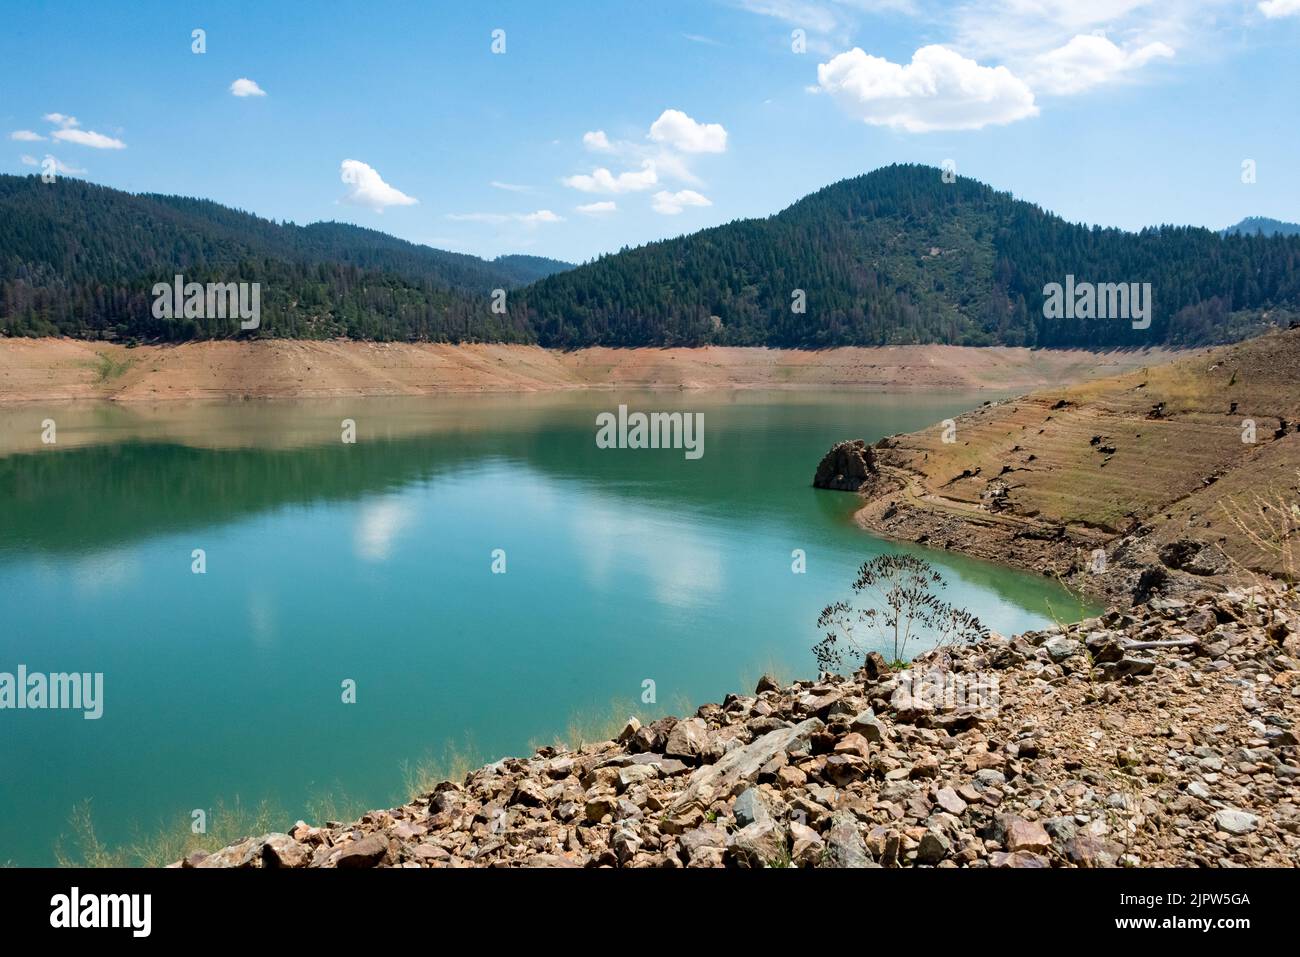 Abandoned Trinity Lake reservoir with 25% water during extreme drought in California, absence of fishermen, boats or houseboats in August 2022. Stock Photo